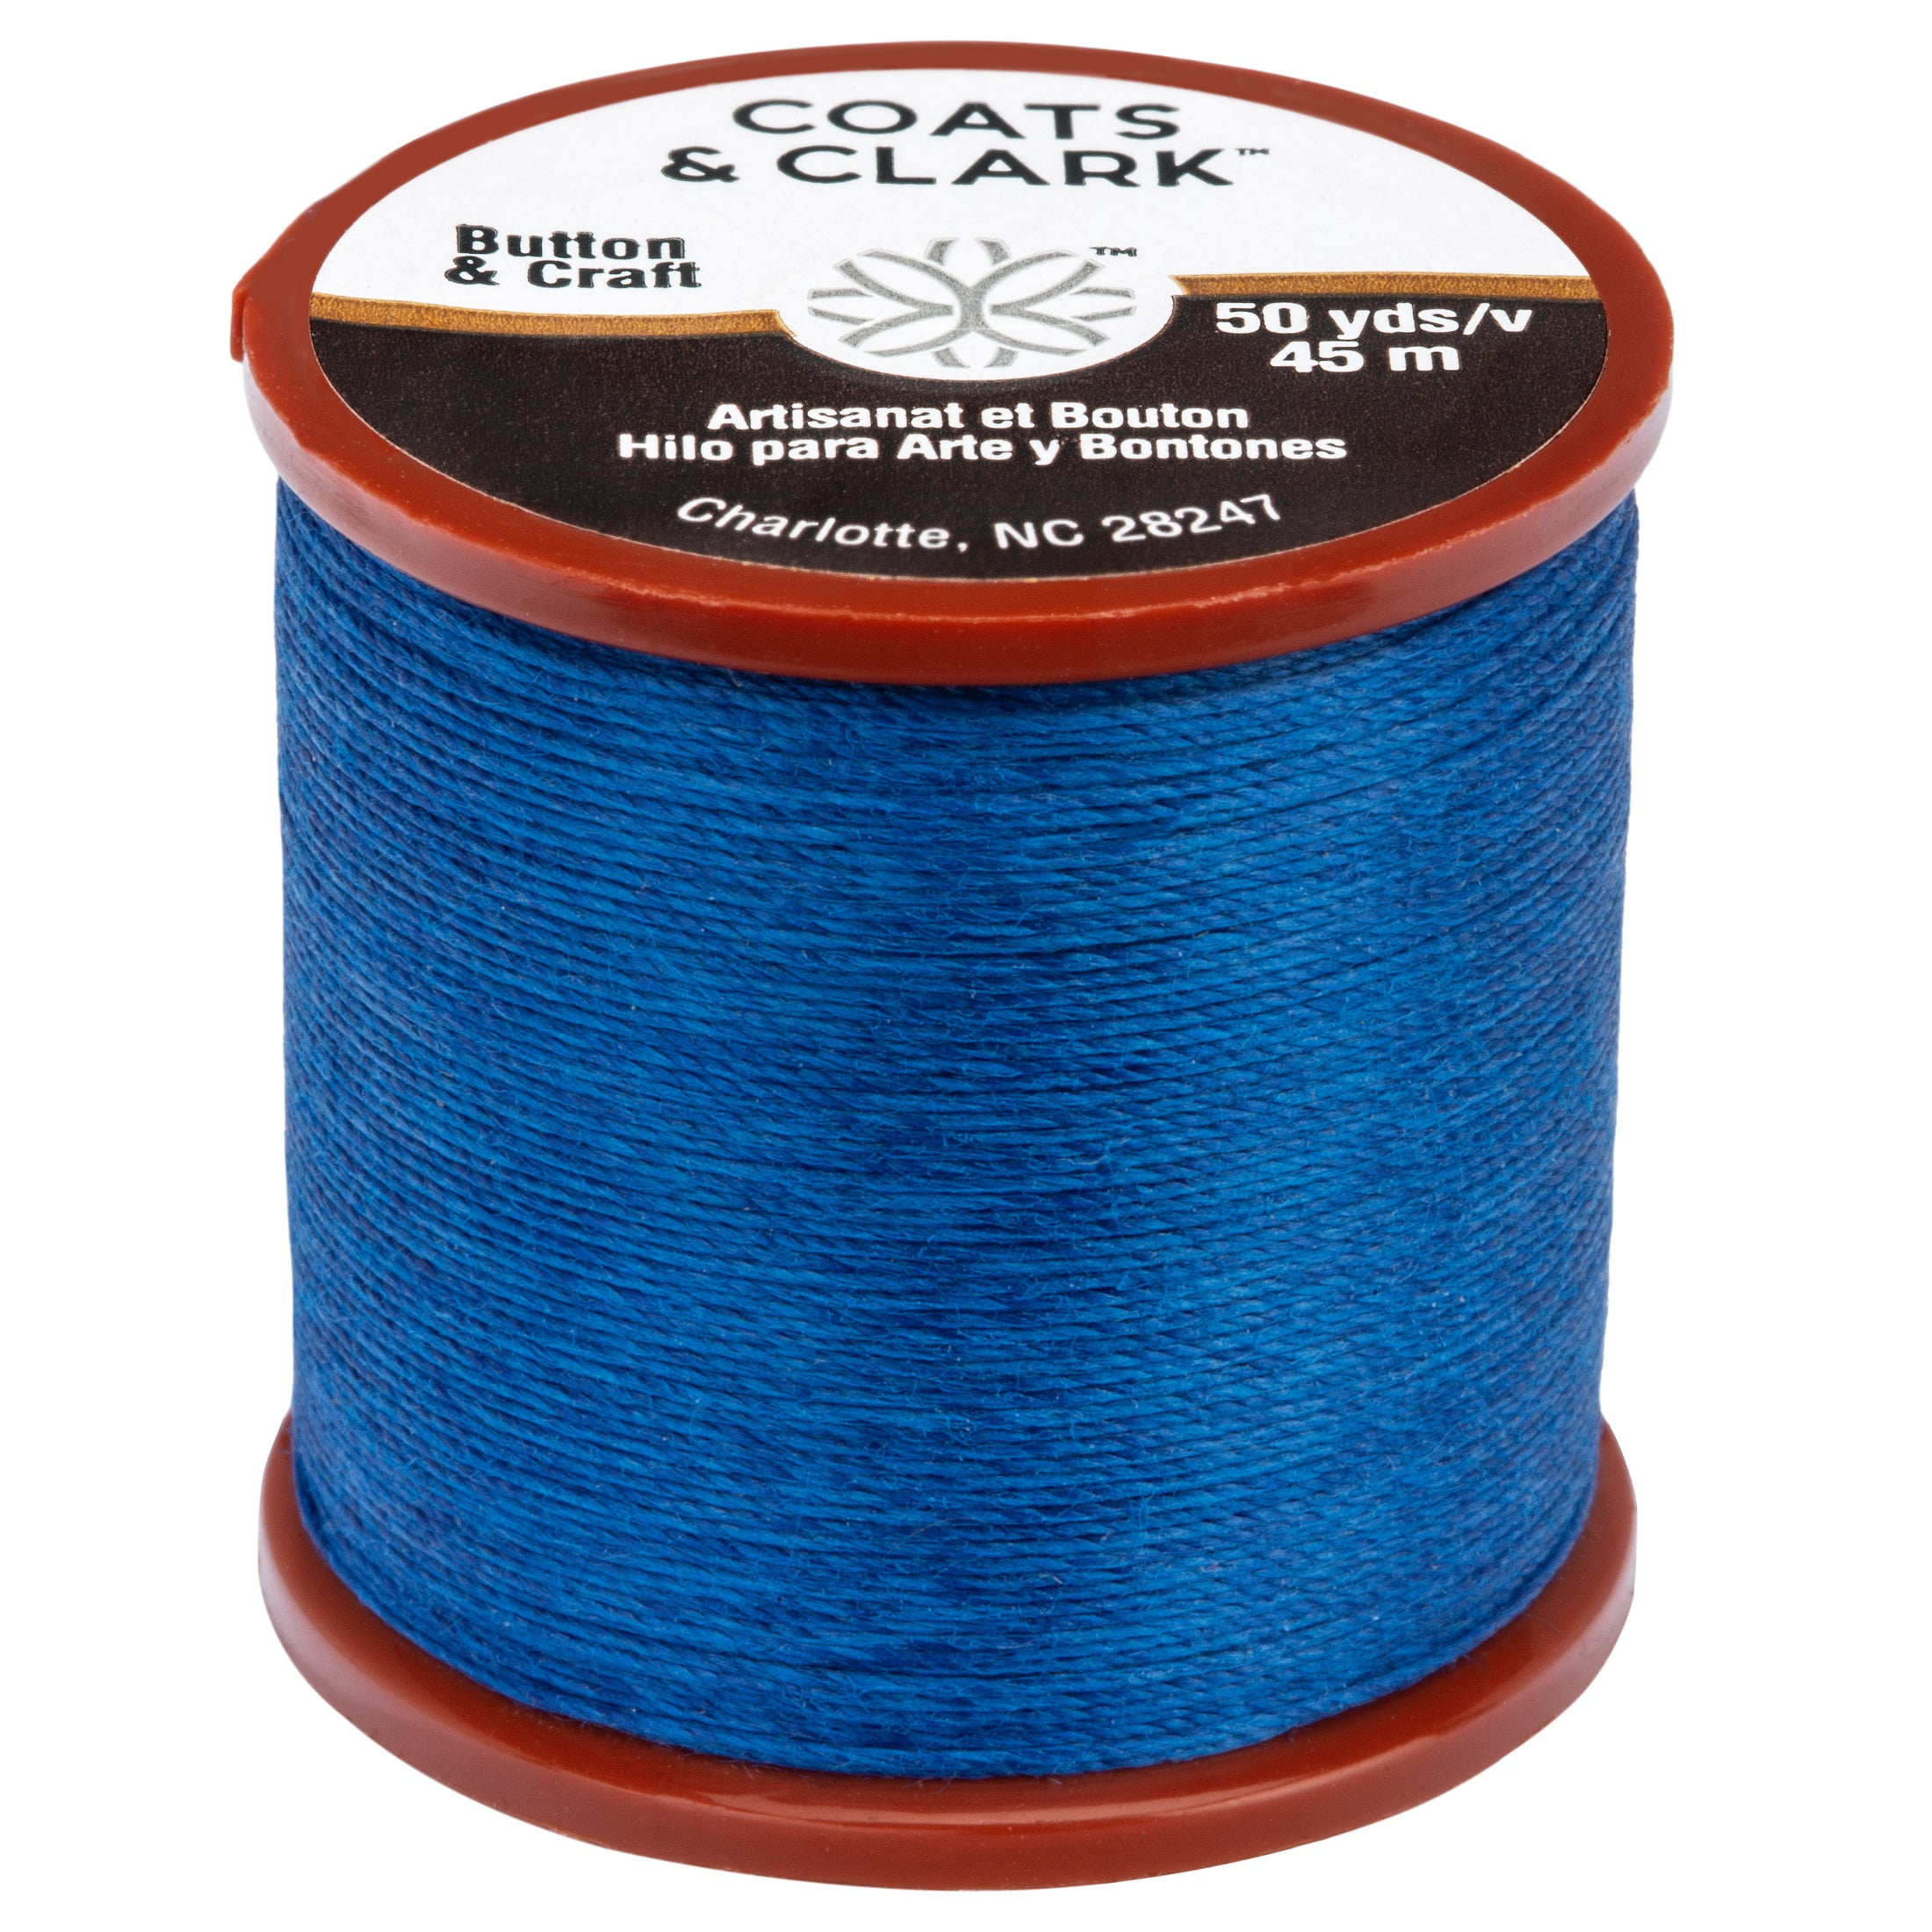 Coats & Clark Dual Duty Plus Button & Craft Thread, 50 yards/45 meters,  Forest Green. 